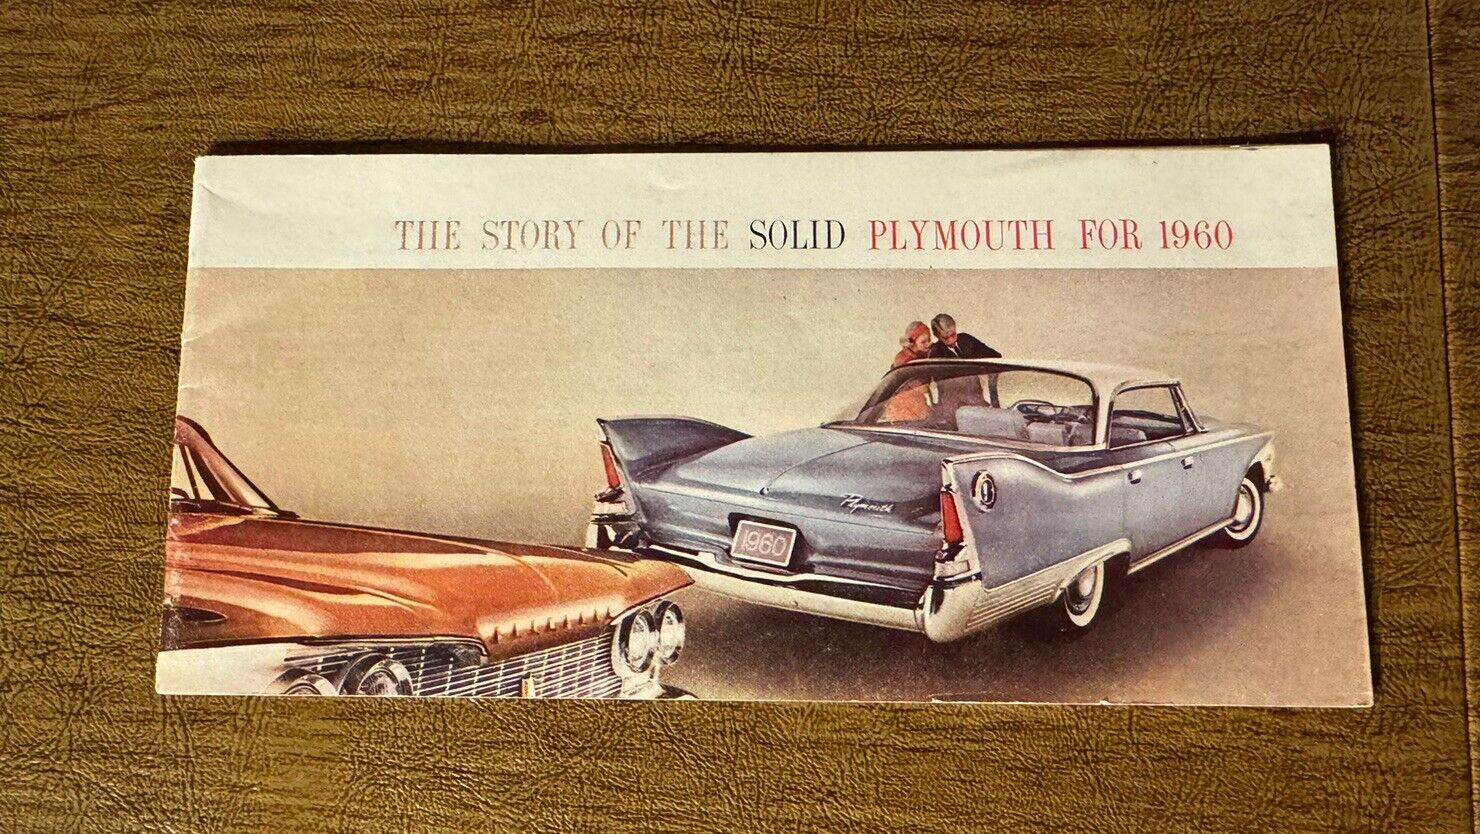 1960 The Story of The Solid Plymouth OEM Dealer New Car Sales Brochure 4” x 8”.